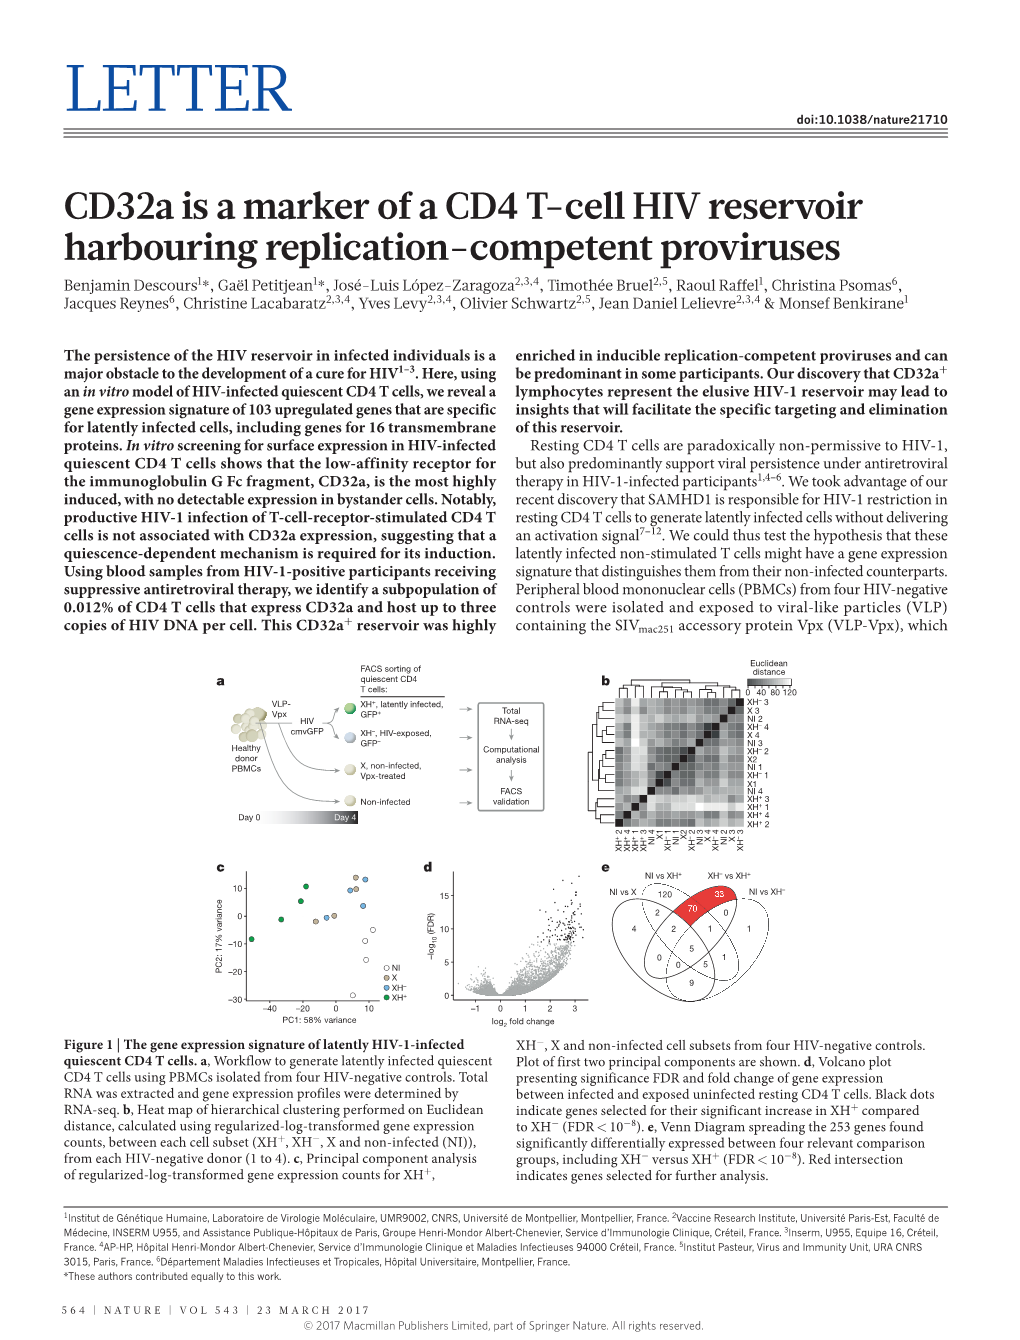 Cd32a Is a Marker of a CD4 T-Cell HIV Reservoir Harbouring Replication